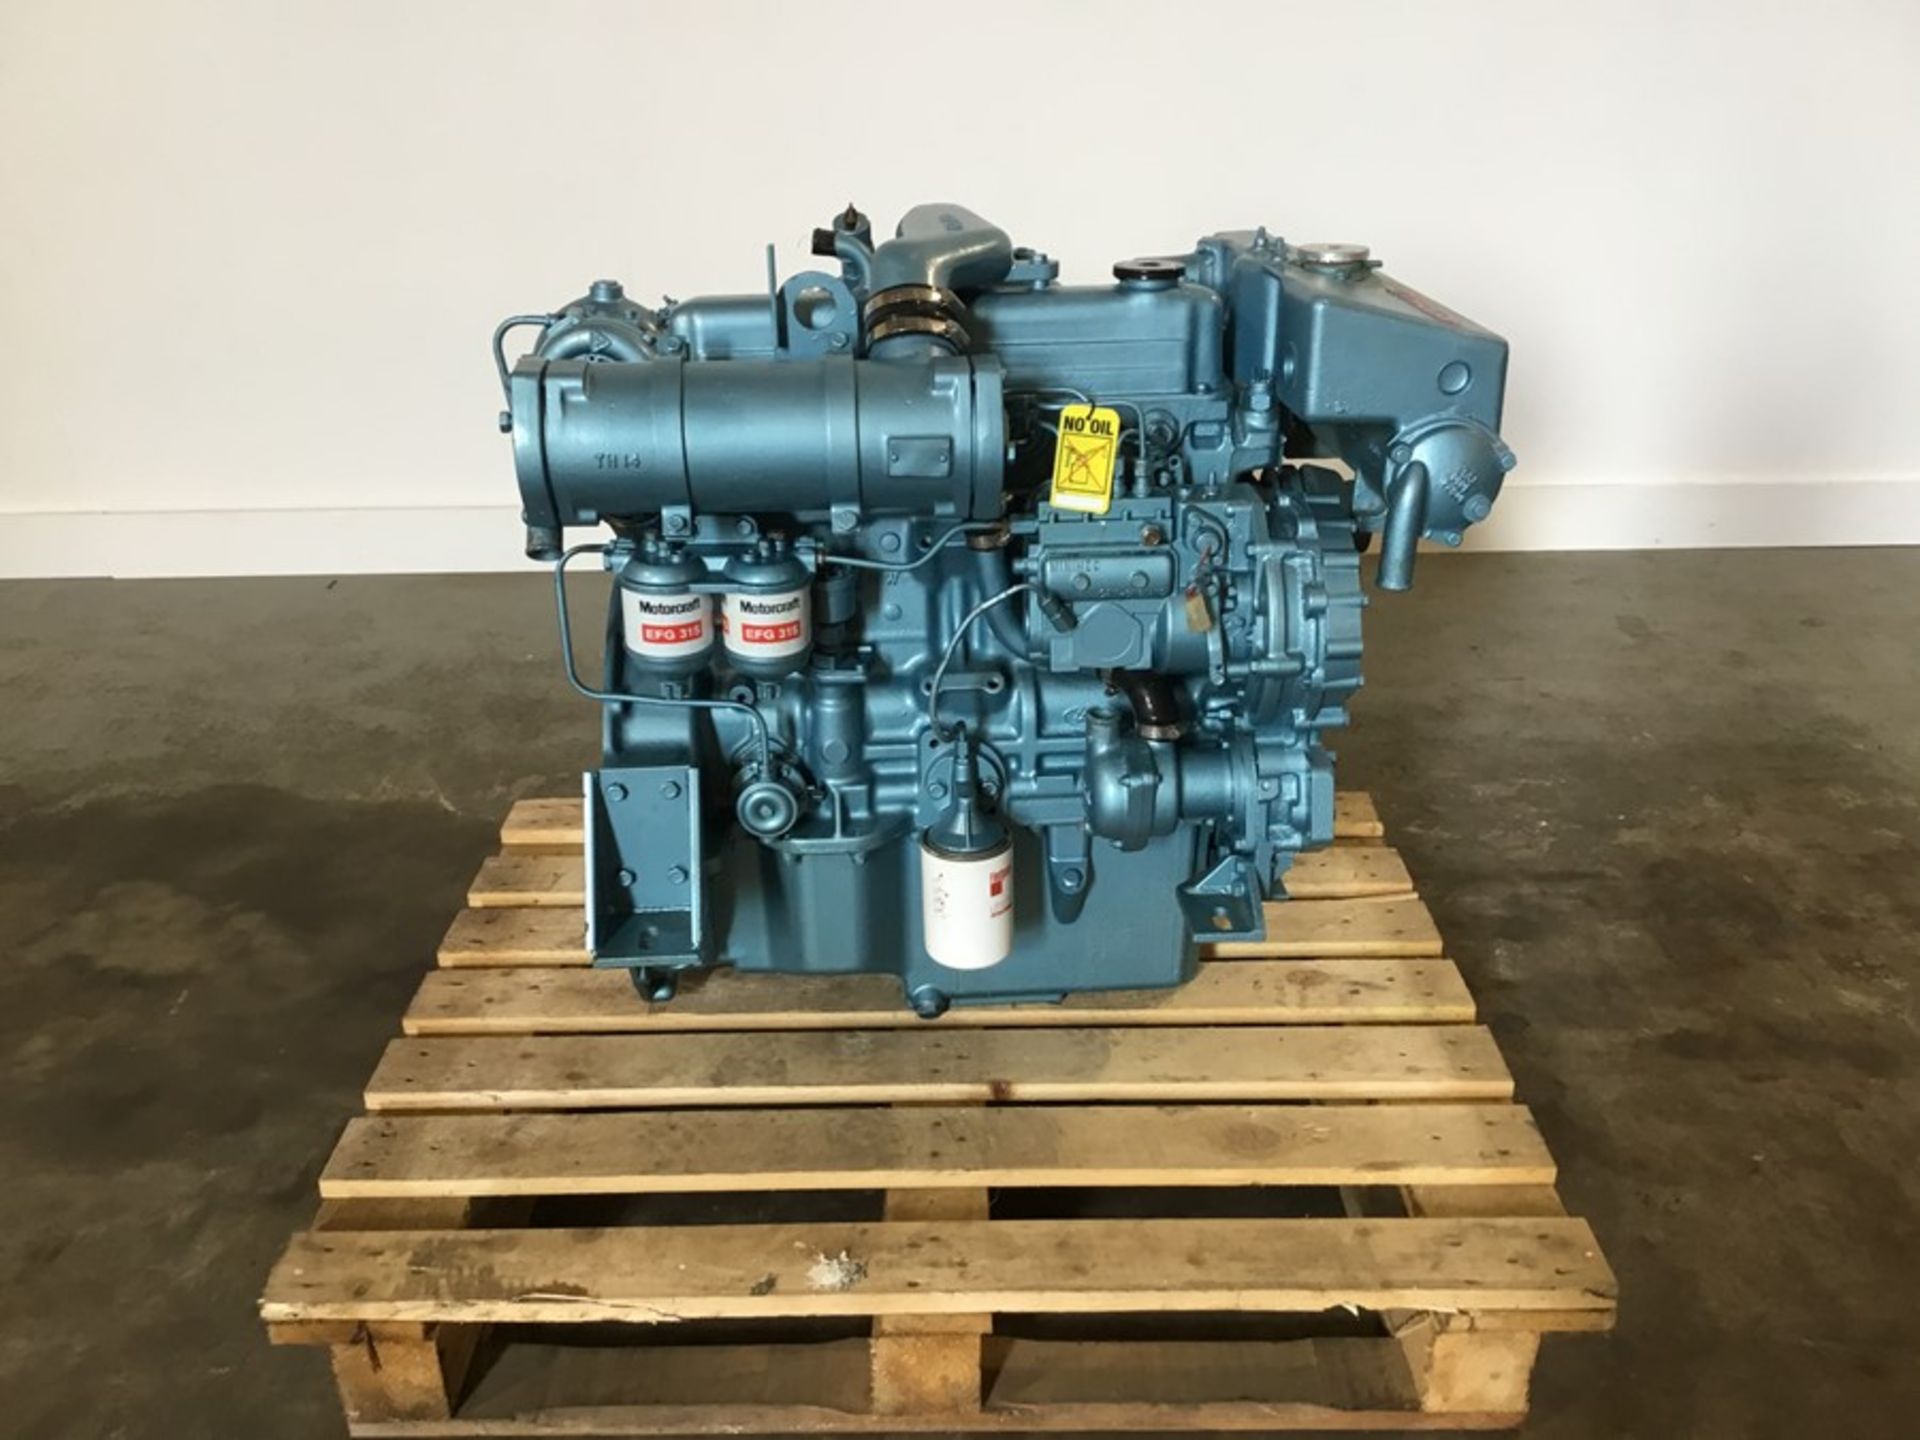 Ford 2722E Marine Diesel engine: Ford 2722e 4cyl Turbo 140Hp @2500Rpm used low hours - Image 12 of 18